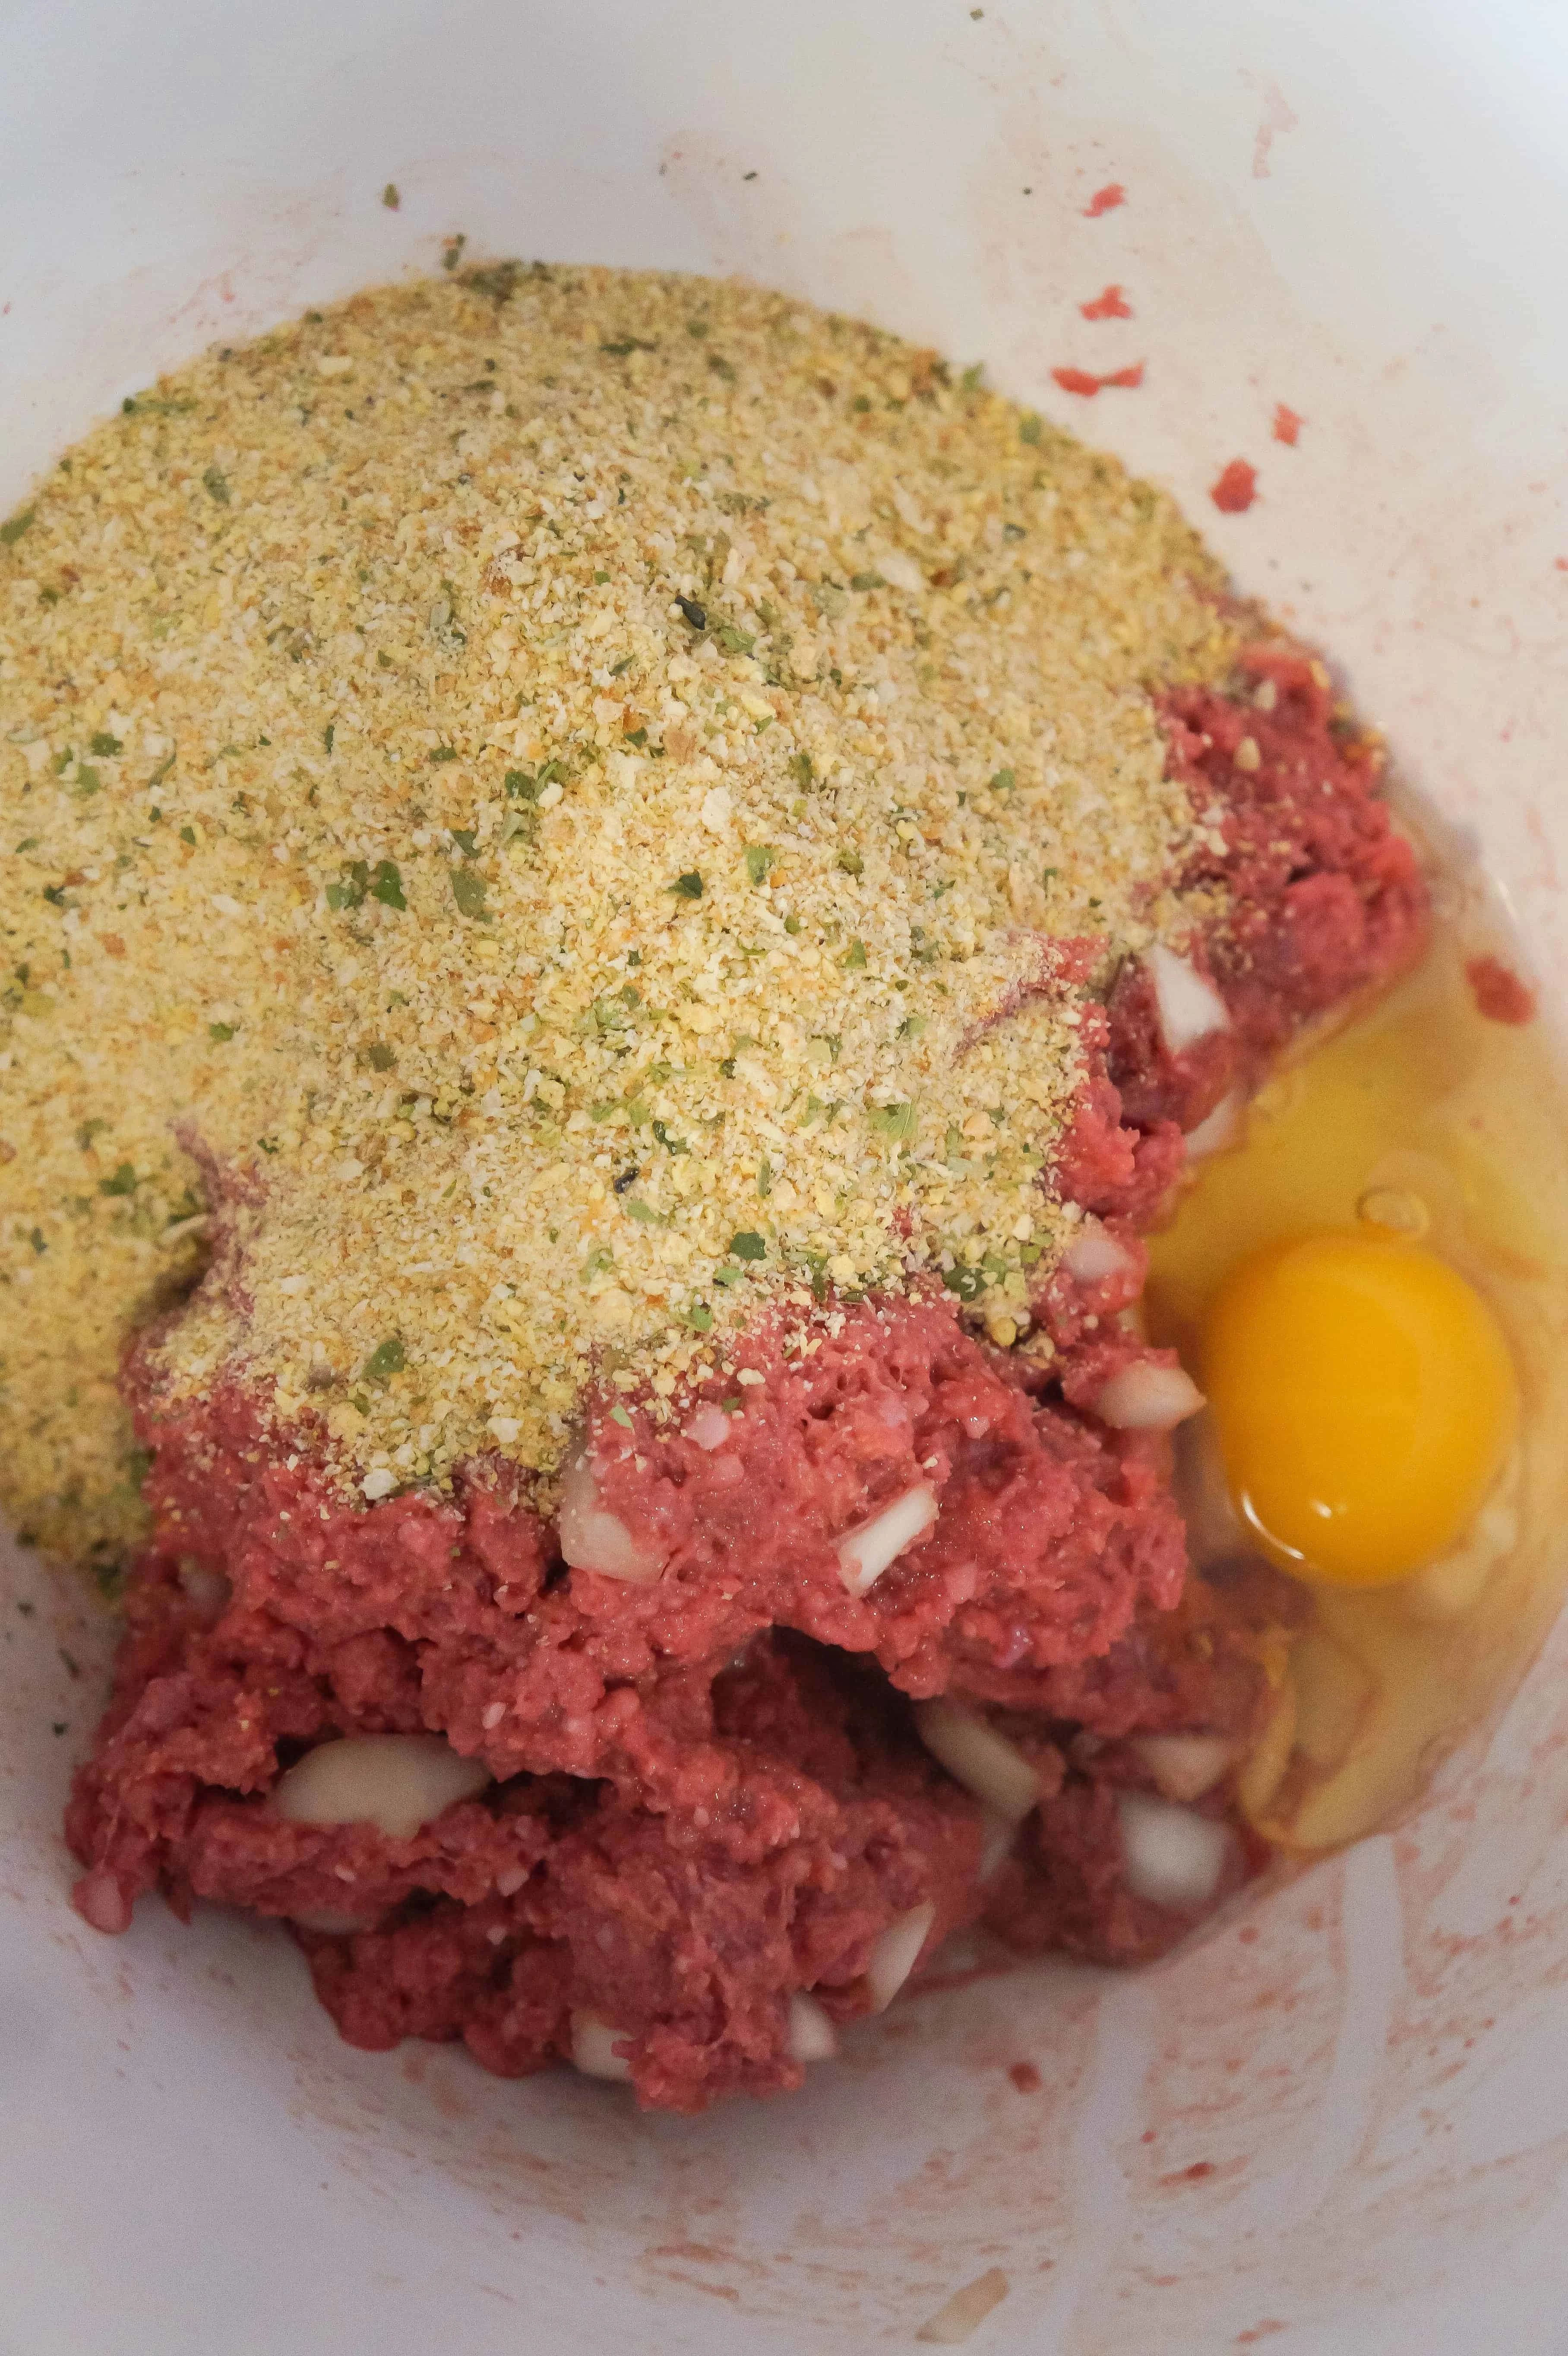 Ground beef, bread crumbs and egg for meatloaf